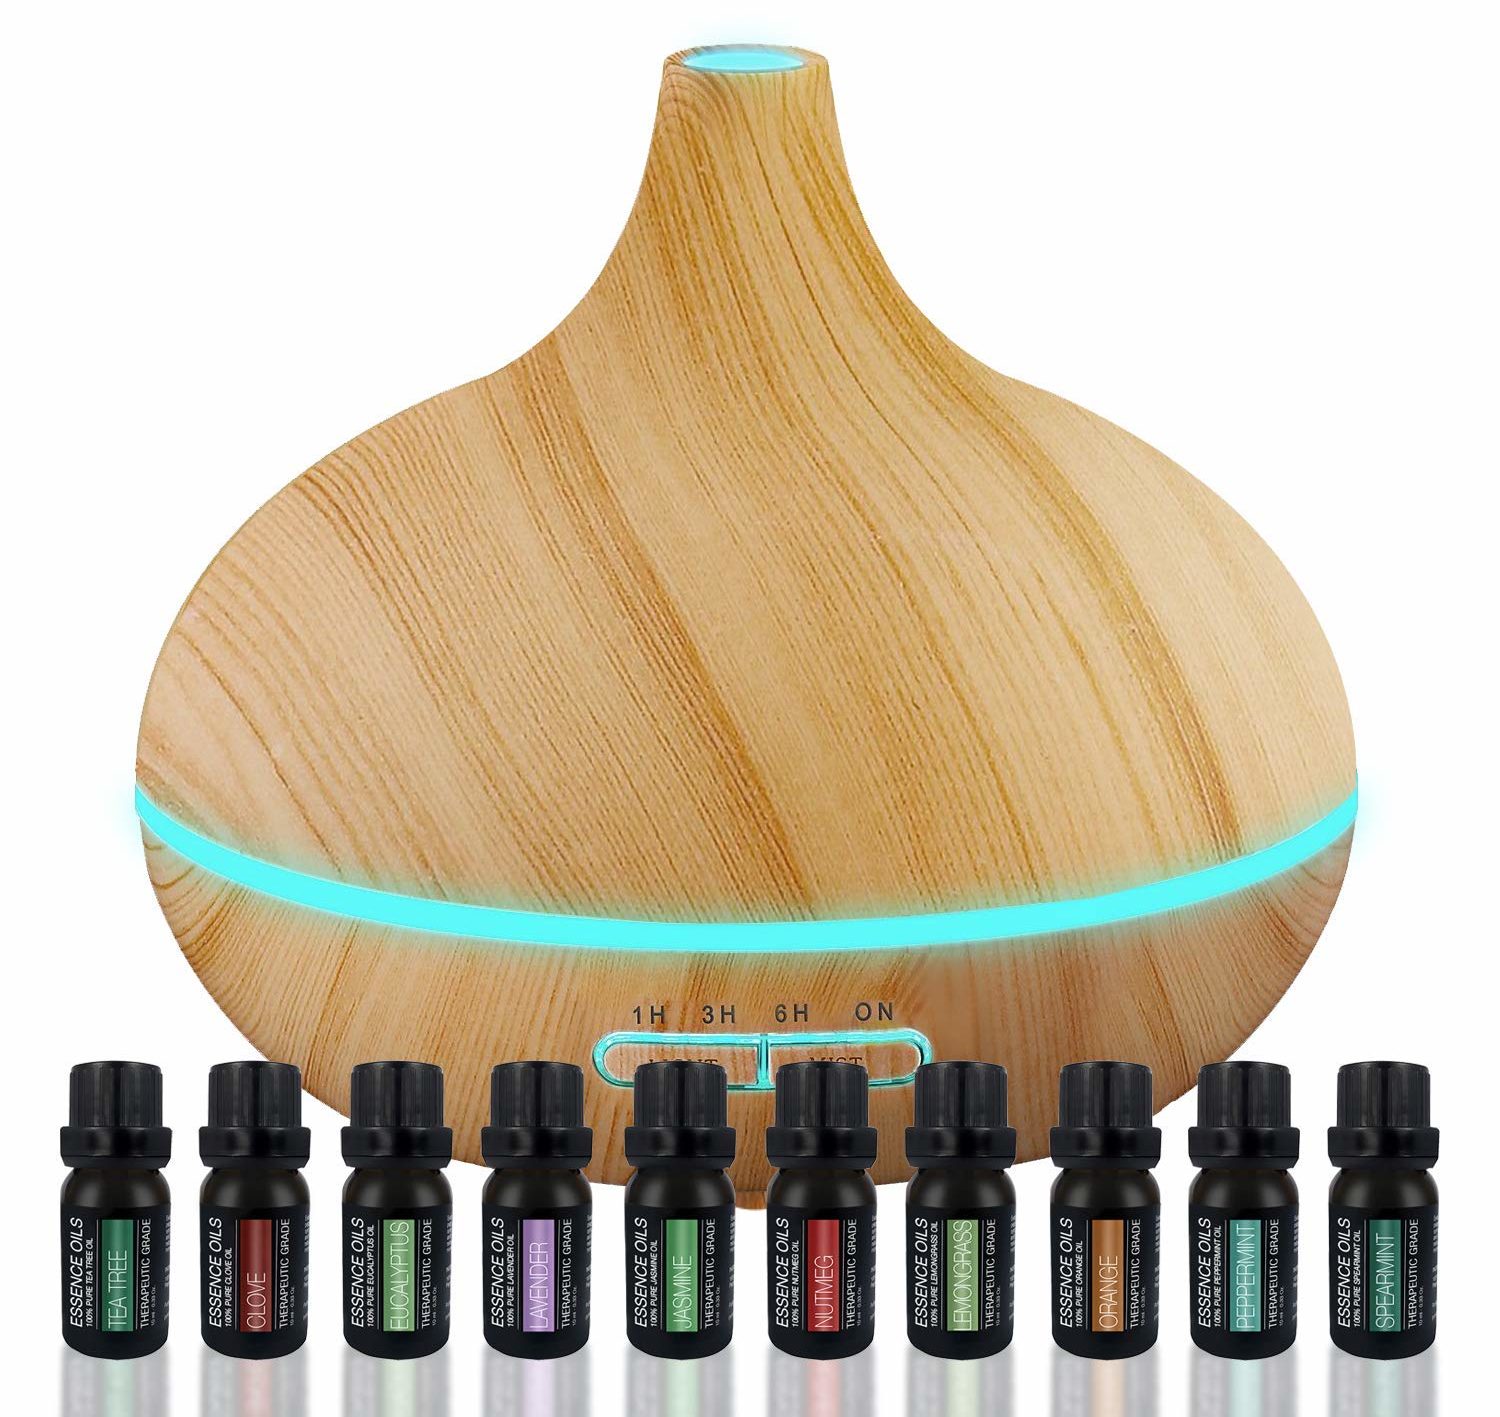 Set of essential oils and diffuser.